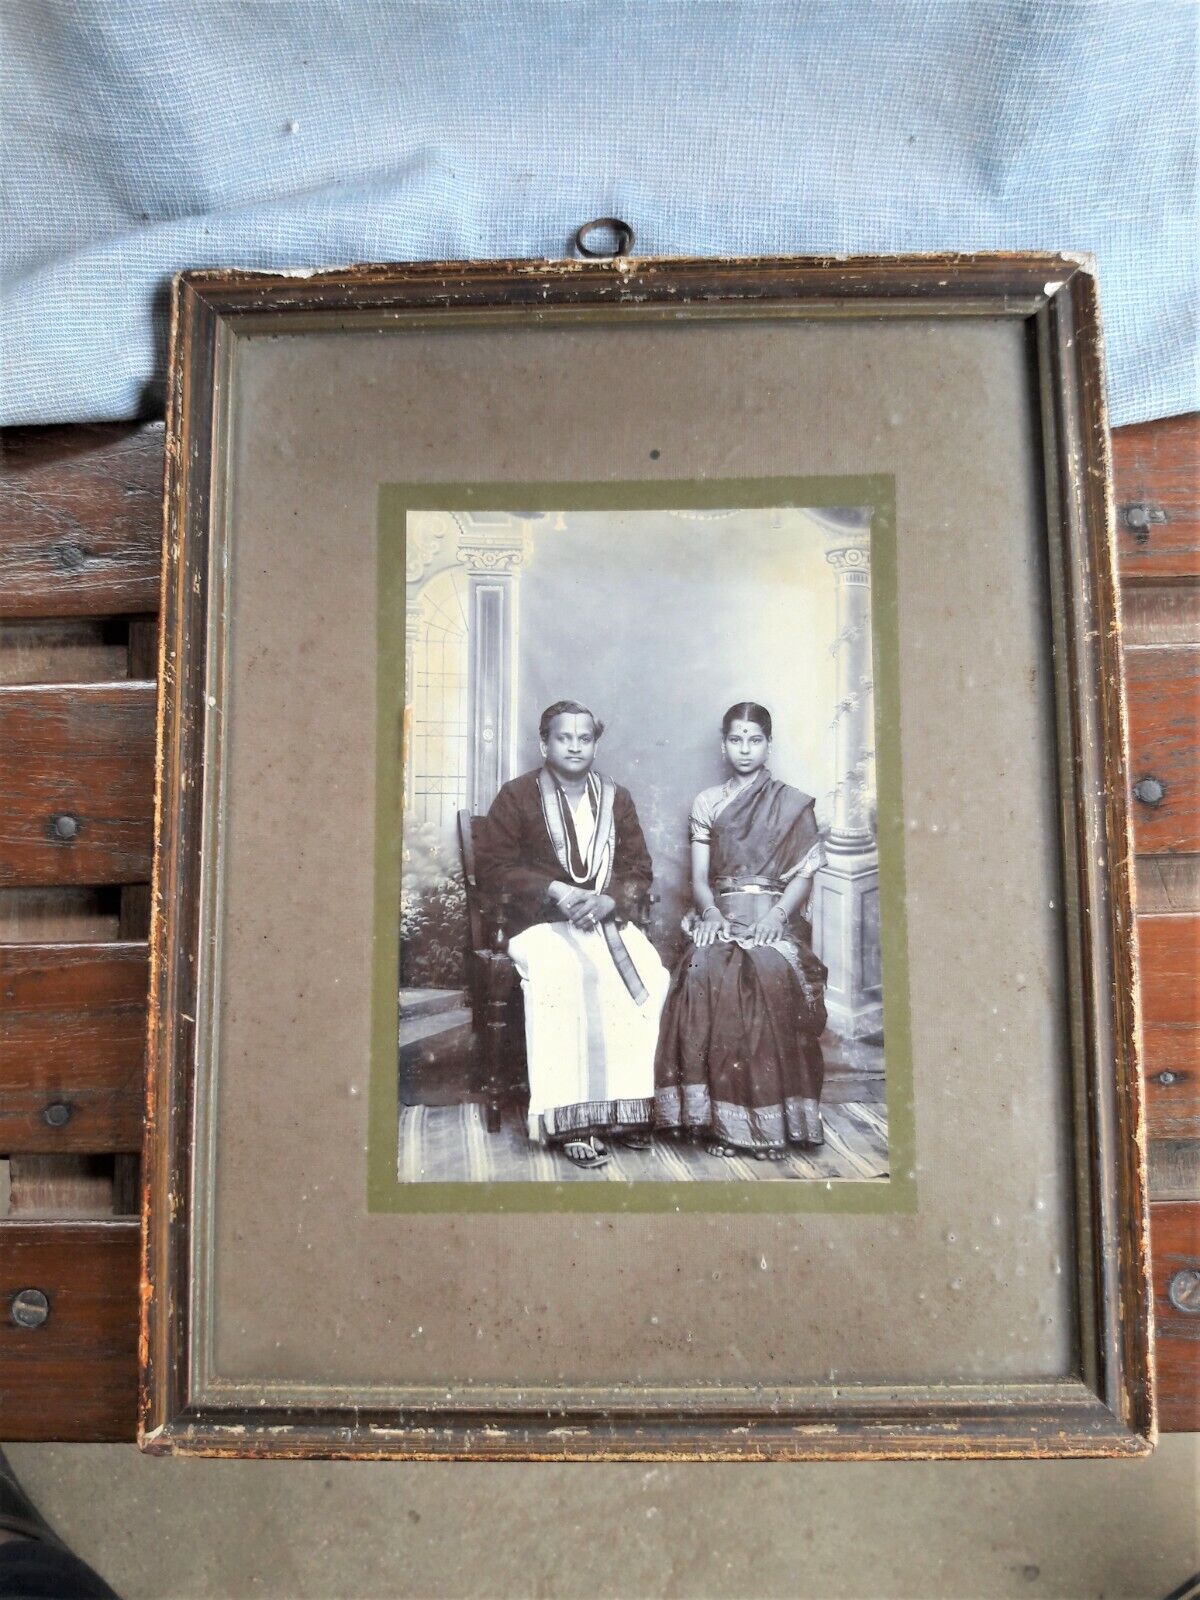 Antique VTG Old B&W Photograph Picture South Indian Couple Traditional Dress A69